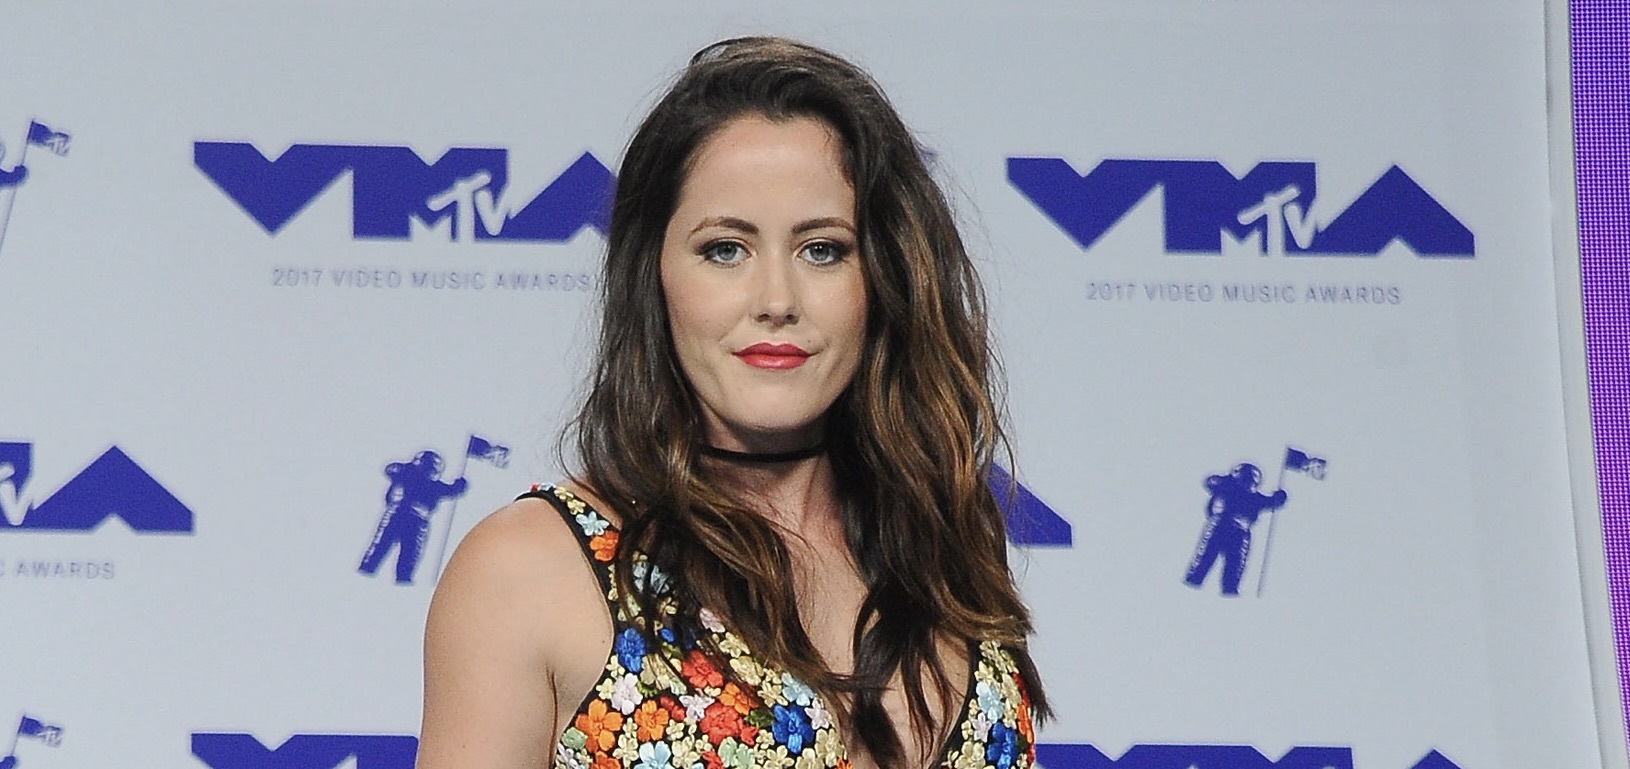 Former ‘Teen Mom 2’ Star Jenelle Evans Regains Custody Of Son Jace After Nearly 13 Years